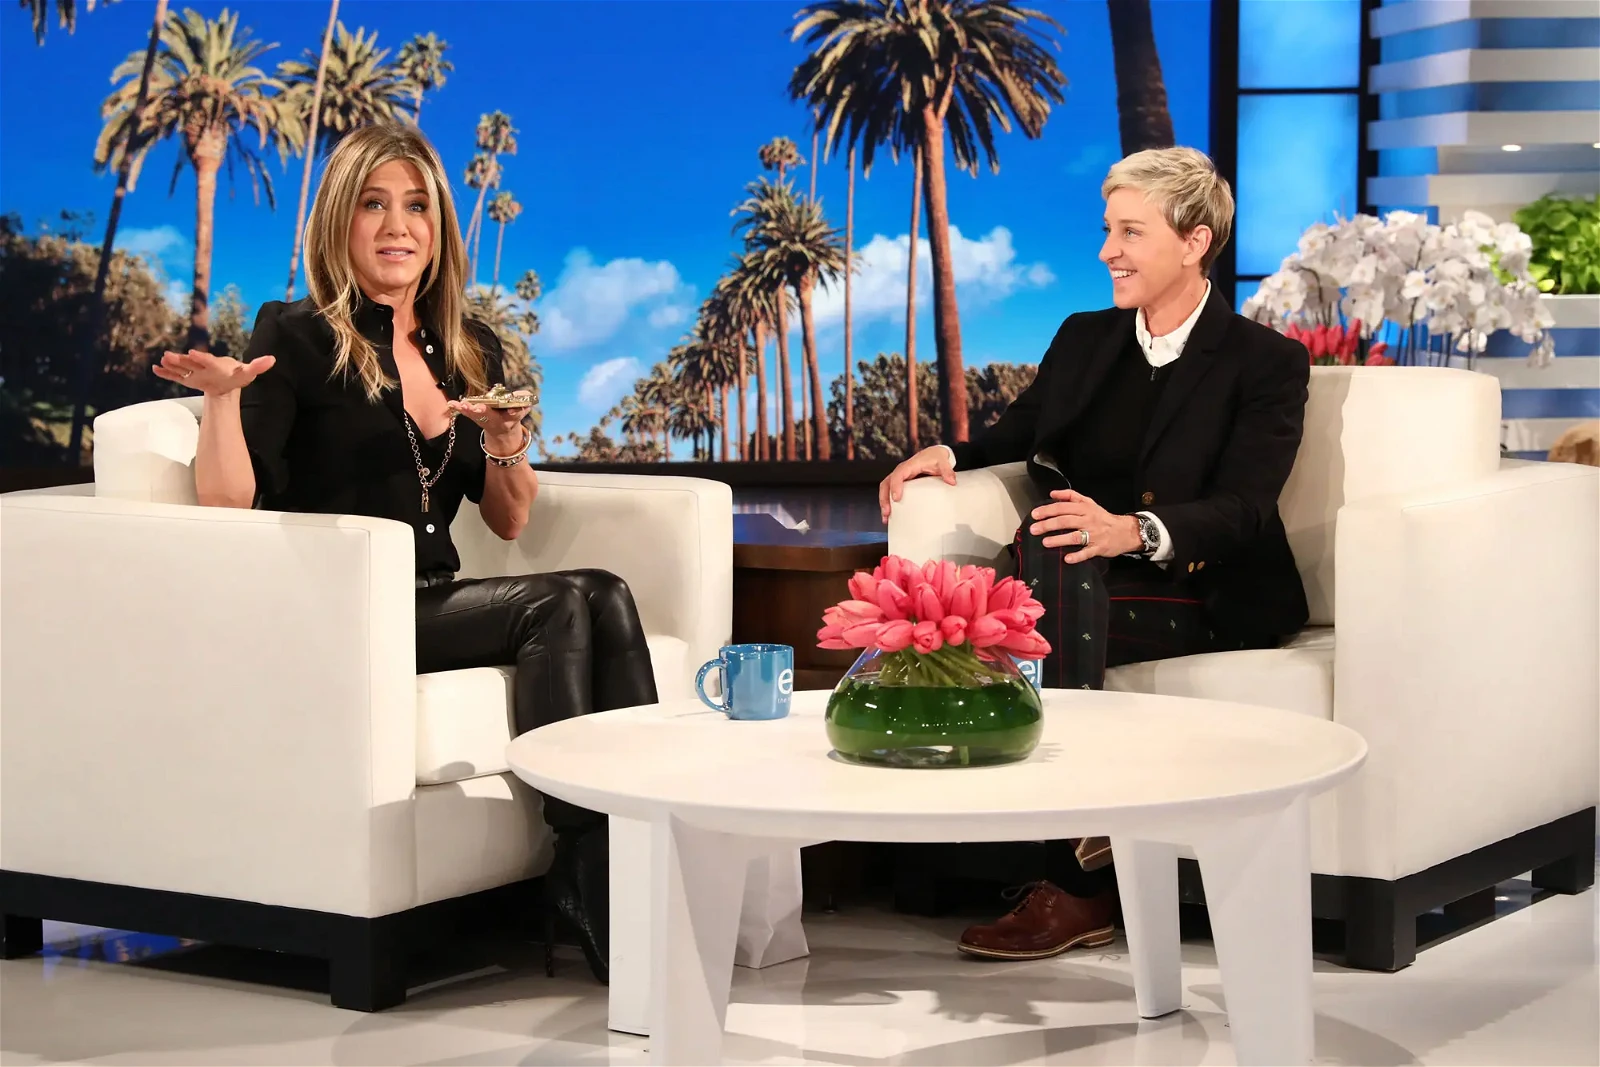 A still from the last episode of The Ellen DeGeneres Show with Jennifer Aniston